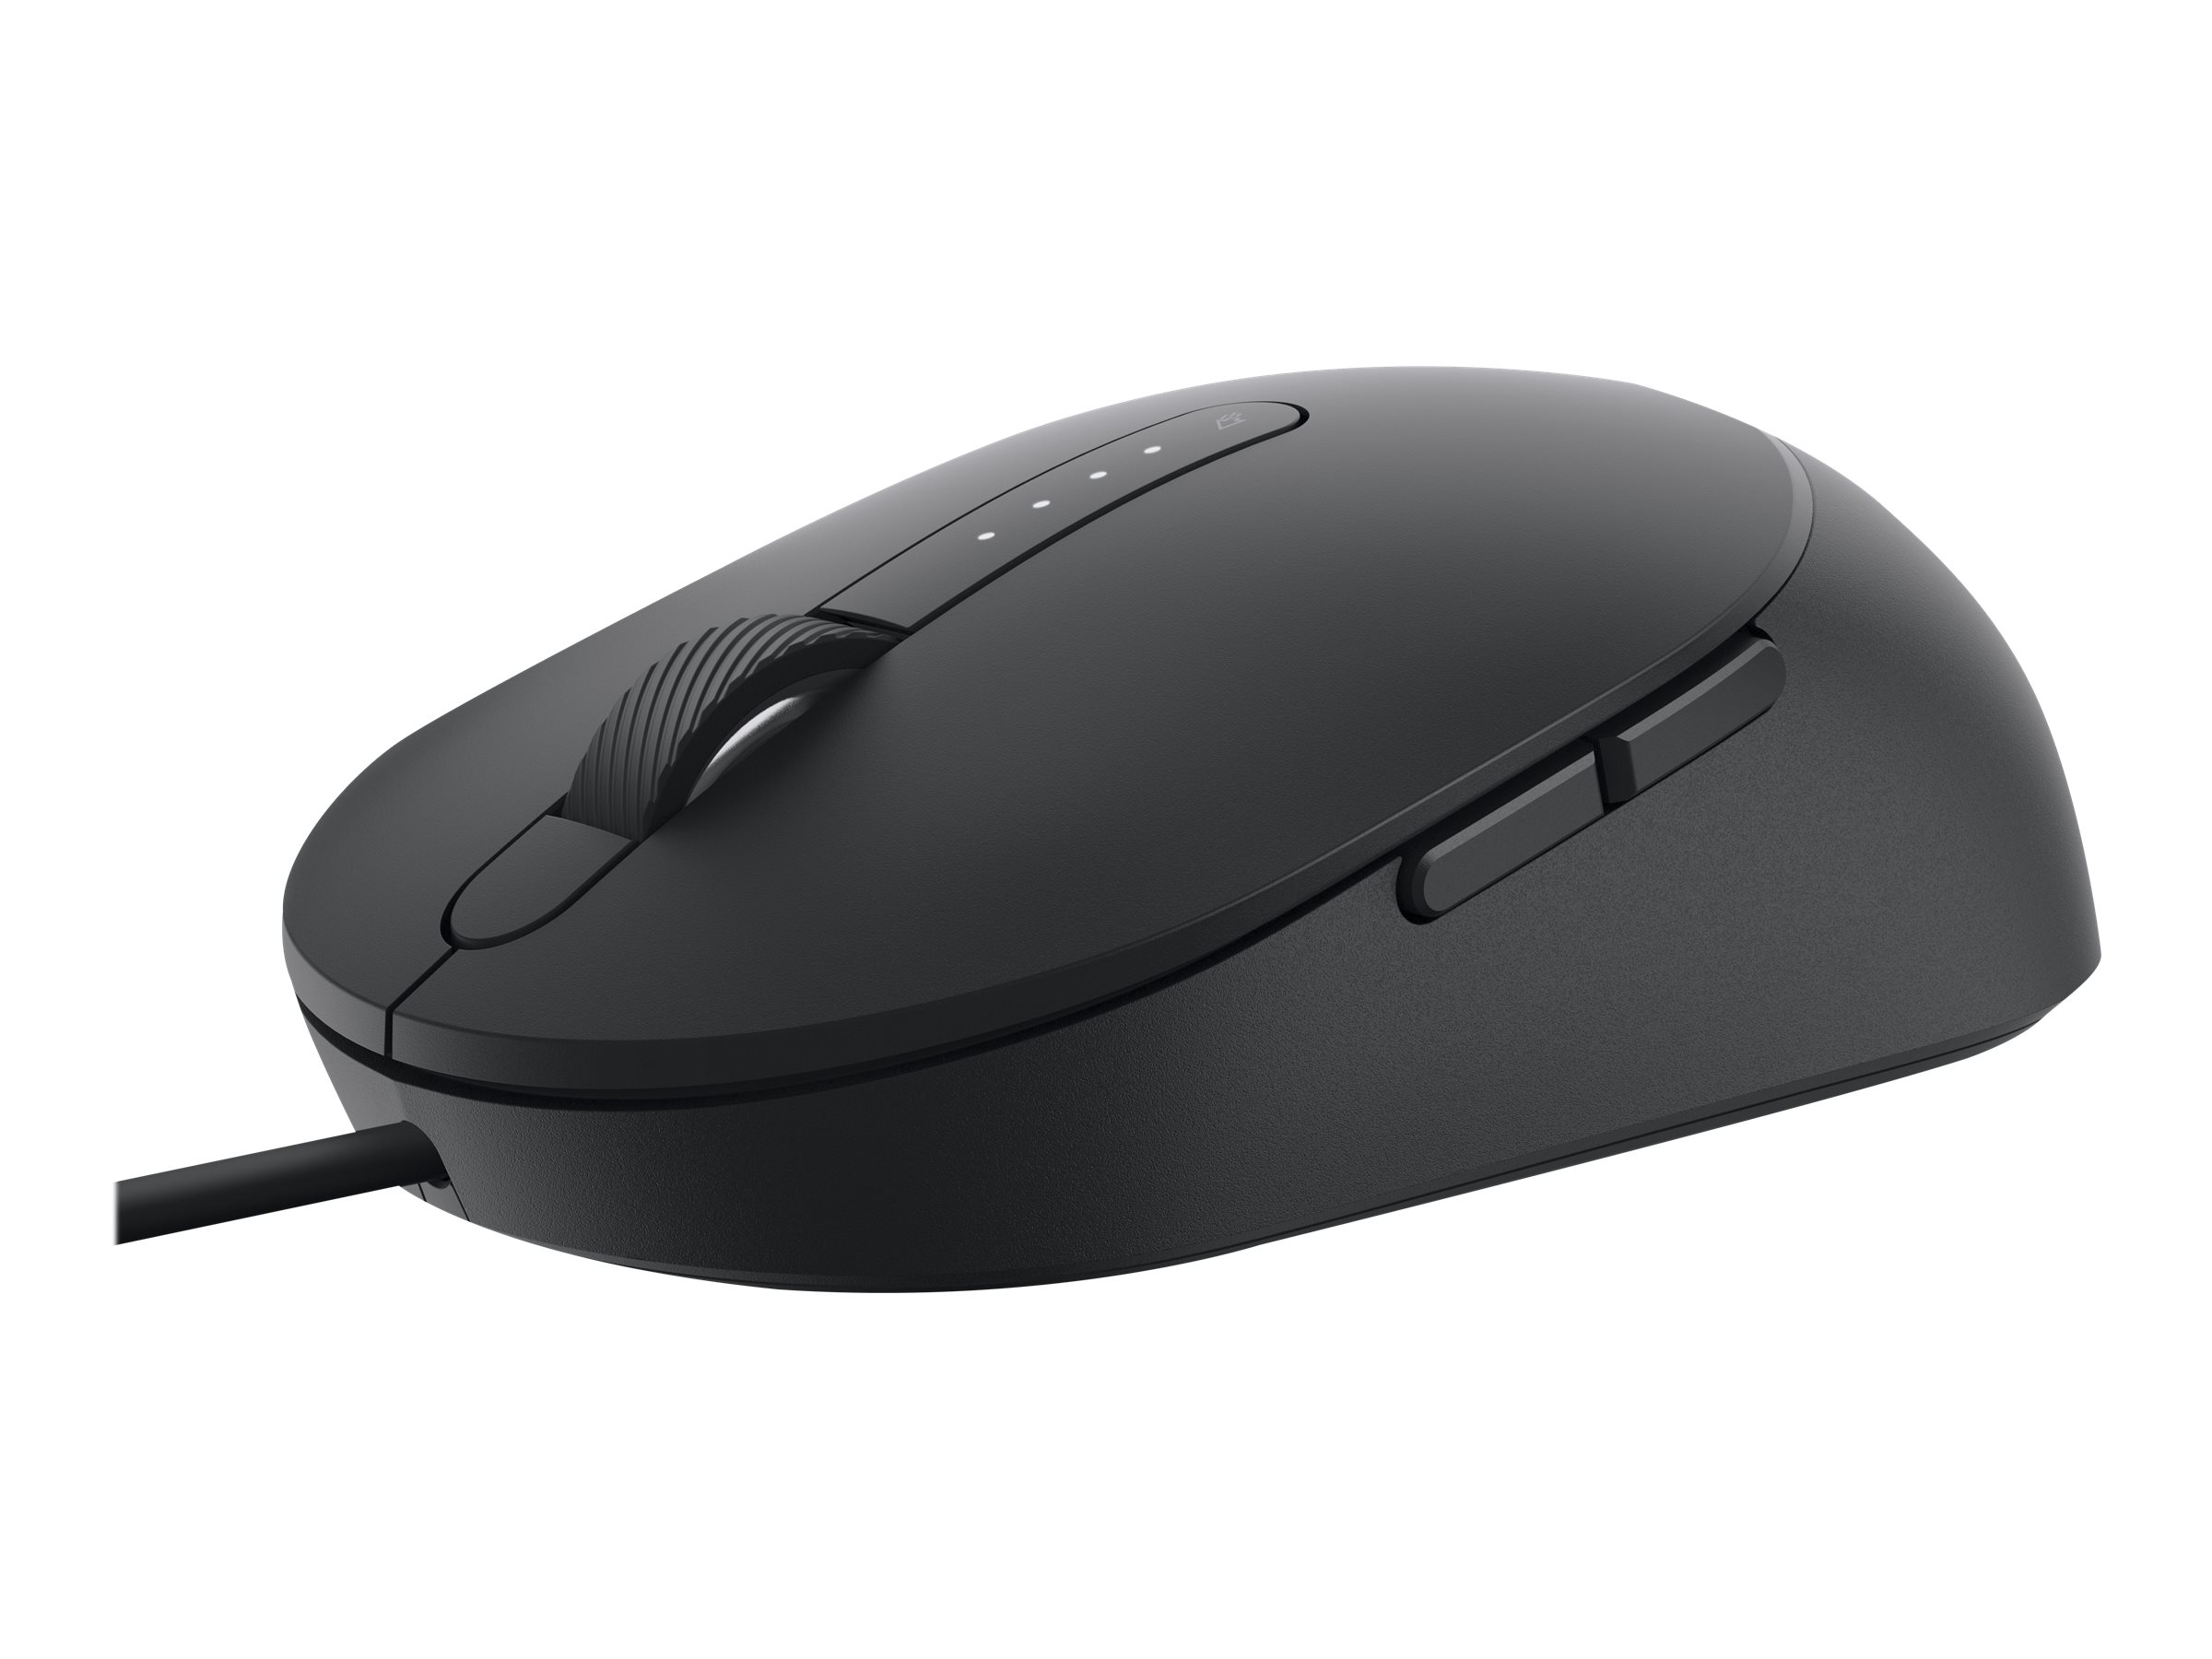 DELL Laser Wired Mouse - MS3220 - Black